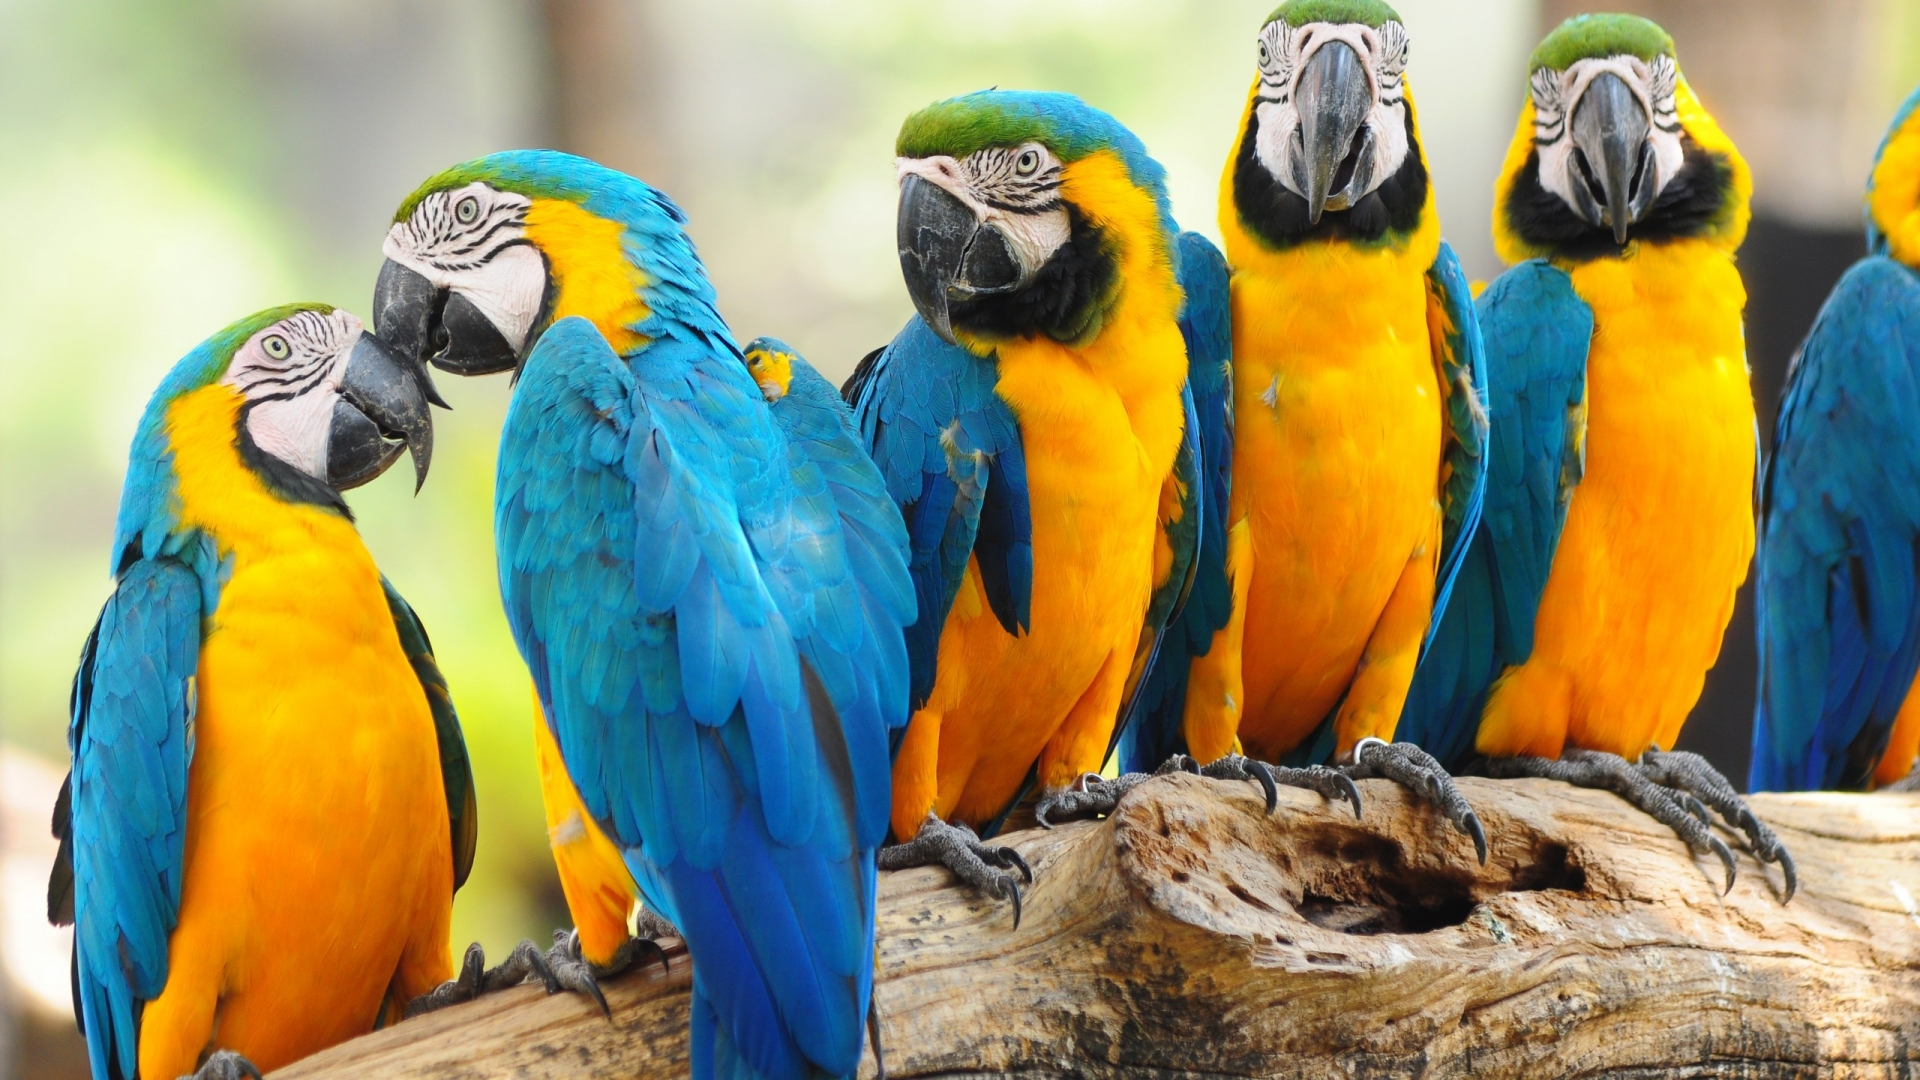 Cool Parrots for 1920 x 1080 HDTV 1080p resolution